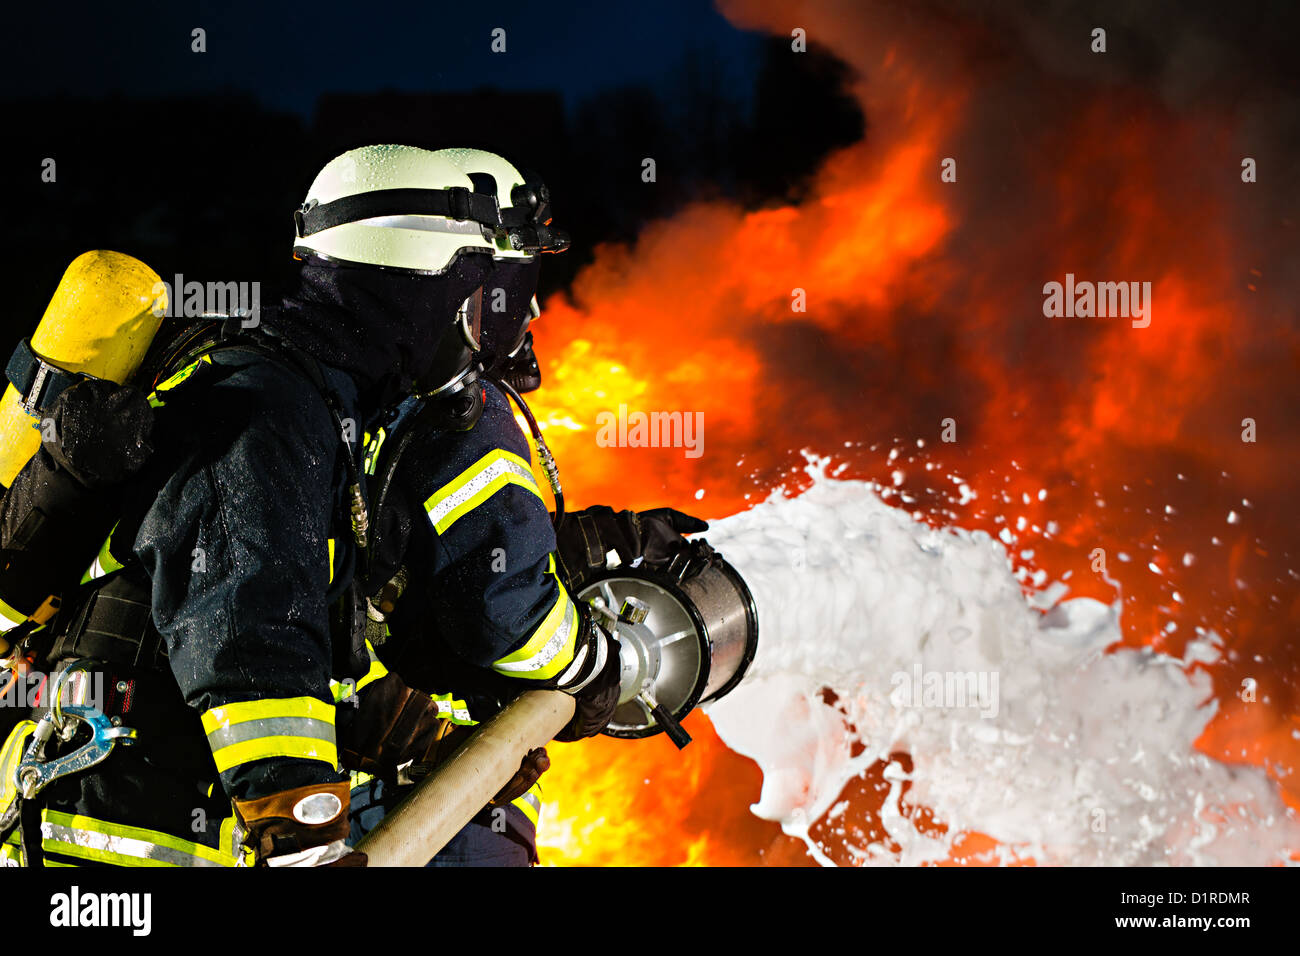 Firefighter - Firemen extinguishing a large blaze, they are standing with protective wear in front of wall of fire Stock Photo